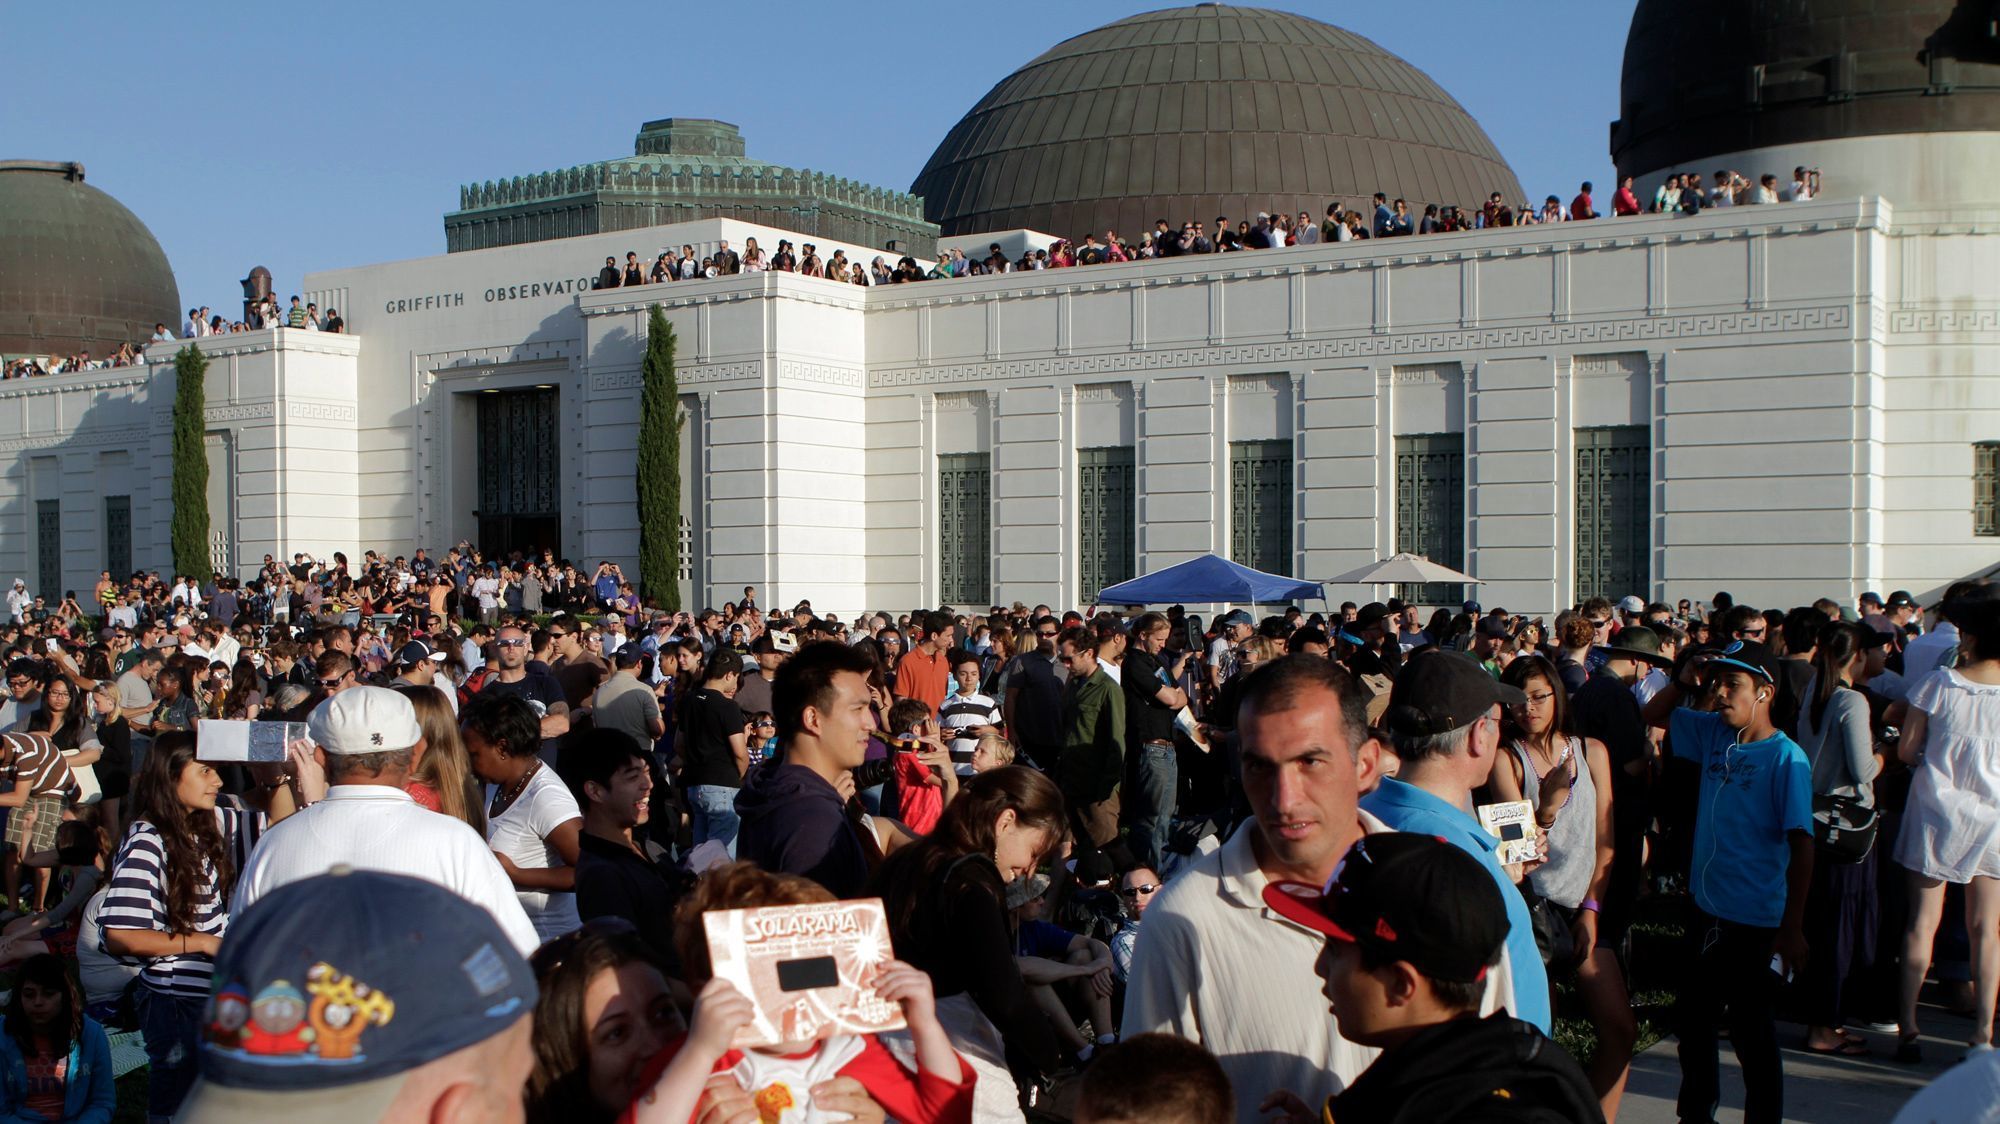 A partial solar eclipse in 2012 drew an enthusiastic crowd to the Griffith observatory.